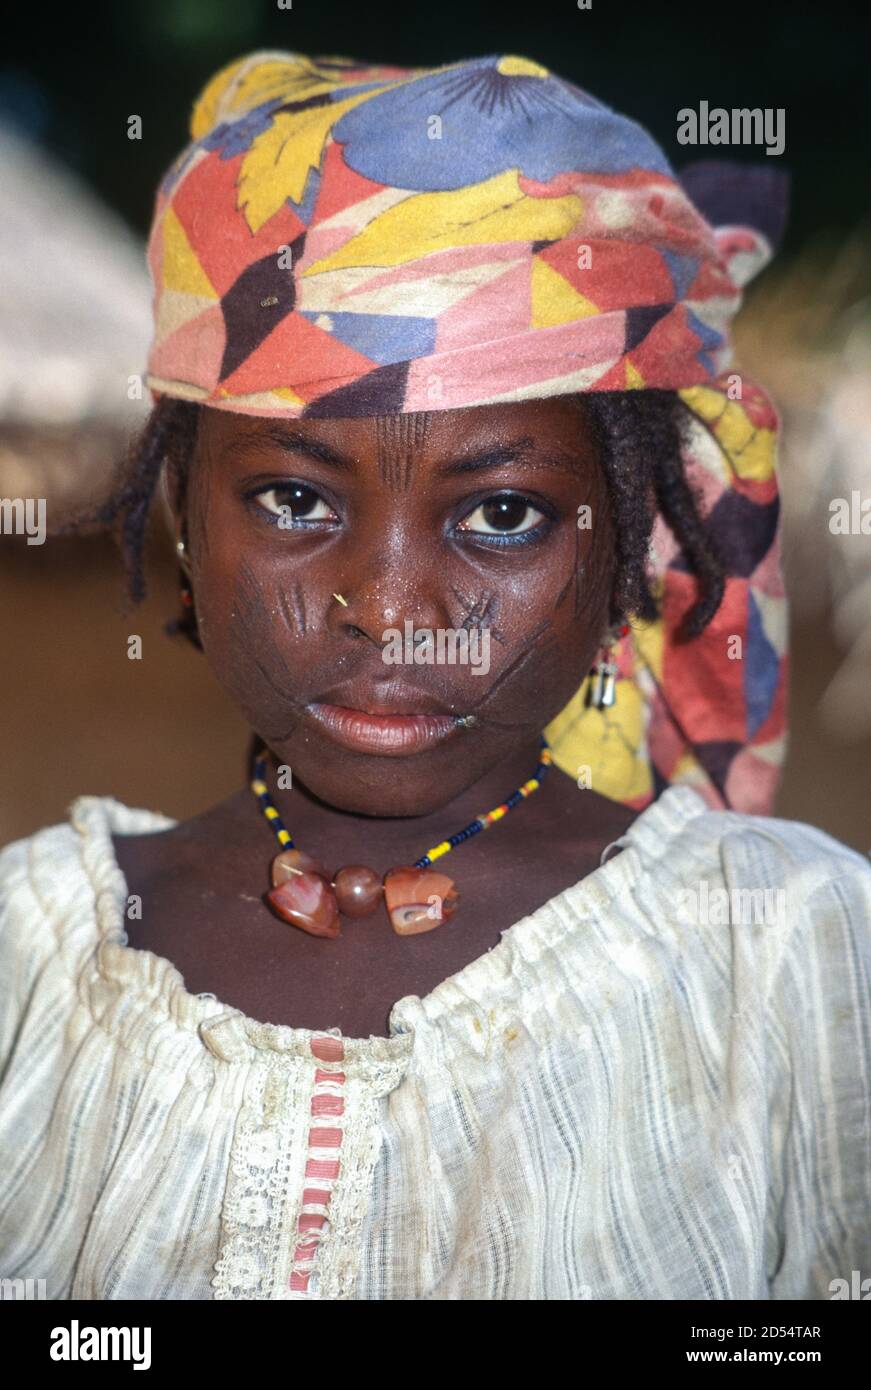 https://c8.alamy.com/comp/2D54TAR/young-hausa-girl-with-tribal-facial-scarification-identification-marks-maraka-south-central-niger-a-piece-of-straw-in-her-nostril-holds-the-place-for-a-nose-ring-2D54TAR.jpg